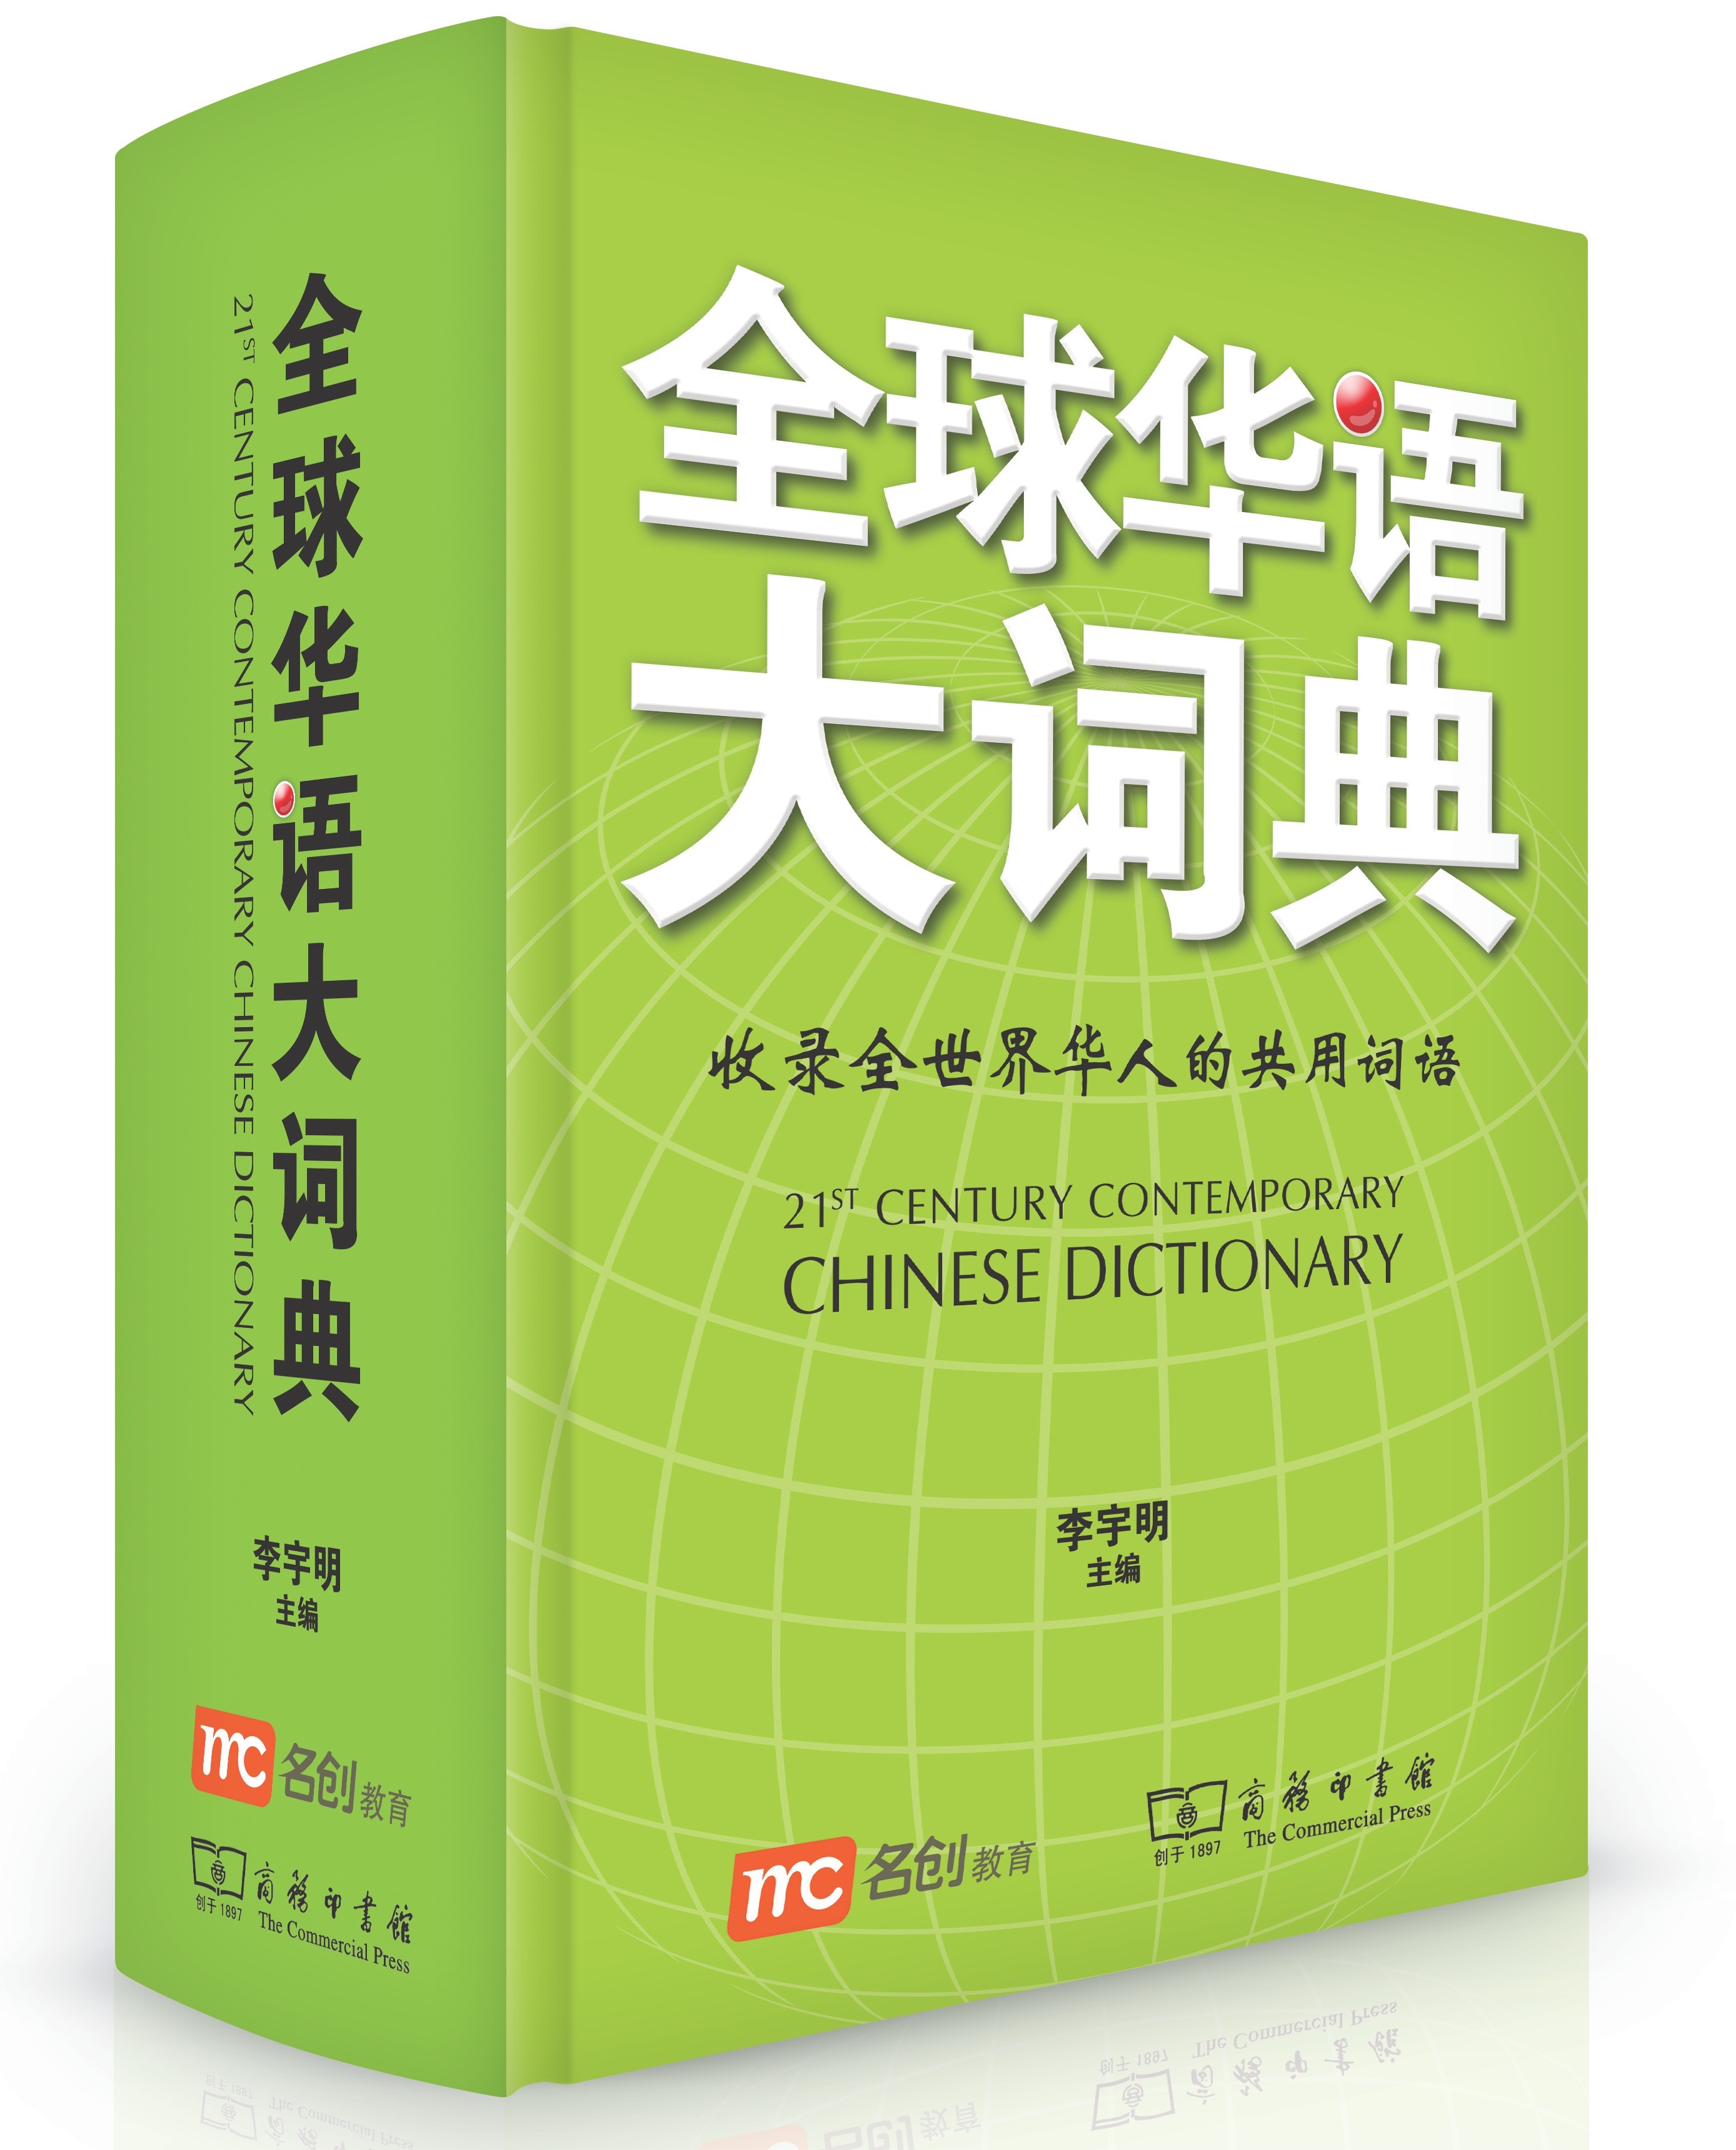 21ST CENTURY CONTEMPORARY CHINESE DICTIONARY 全球华语大词典